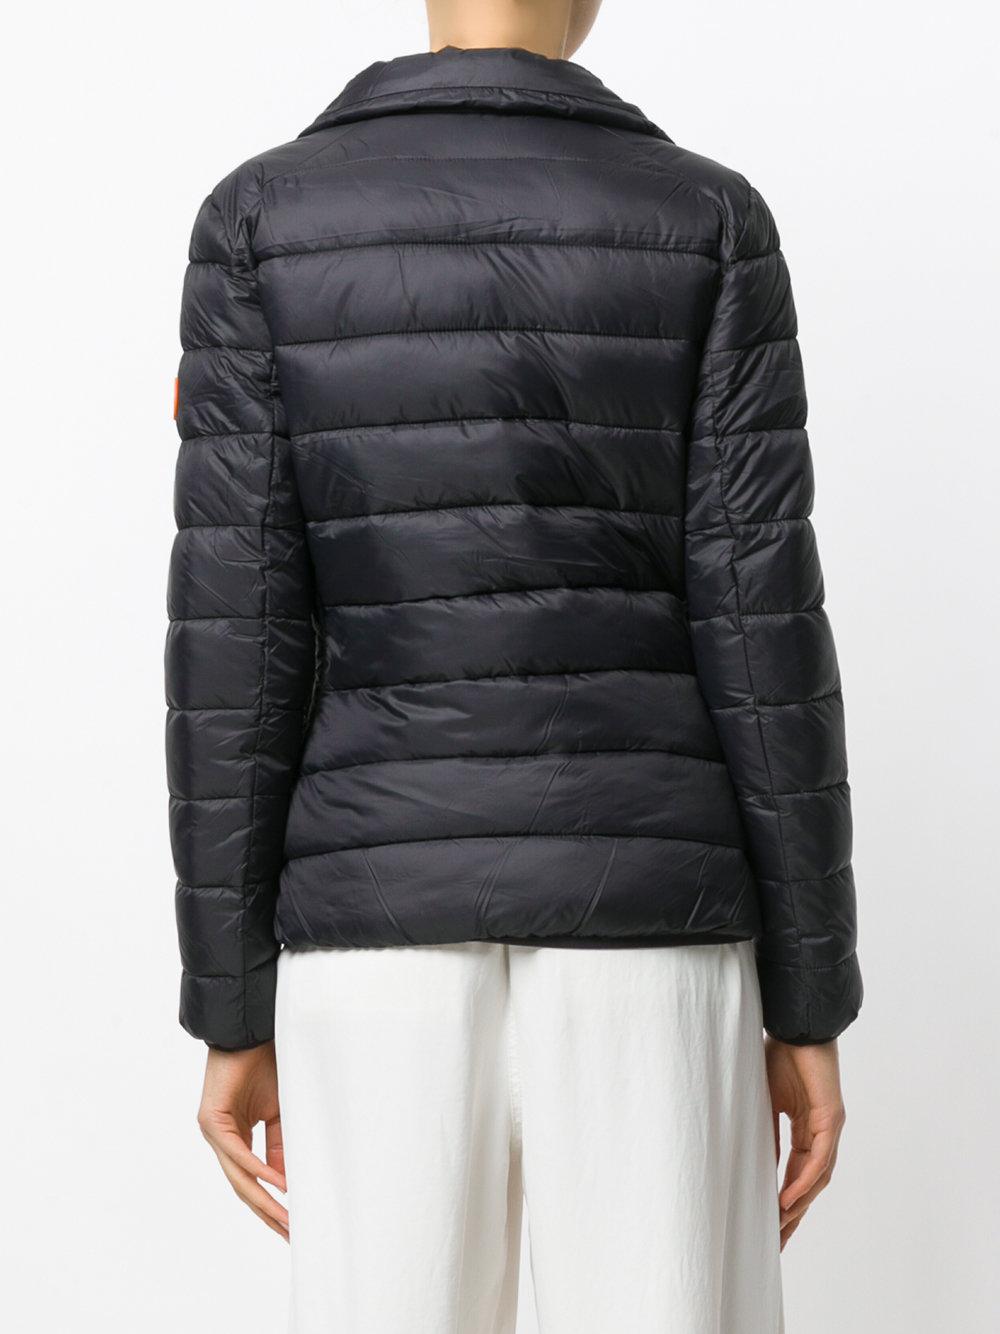 Lyst - Save The Duck Short Padded Jacket in Black